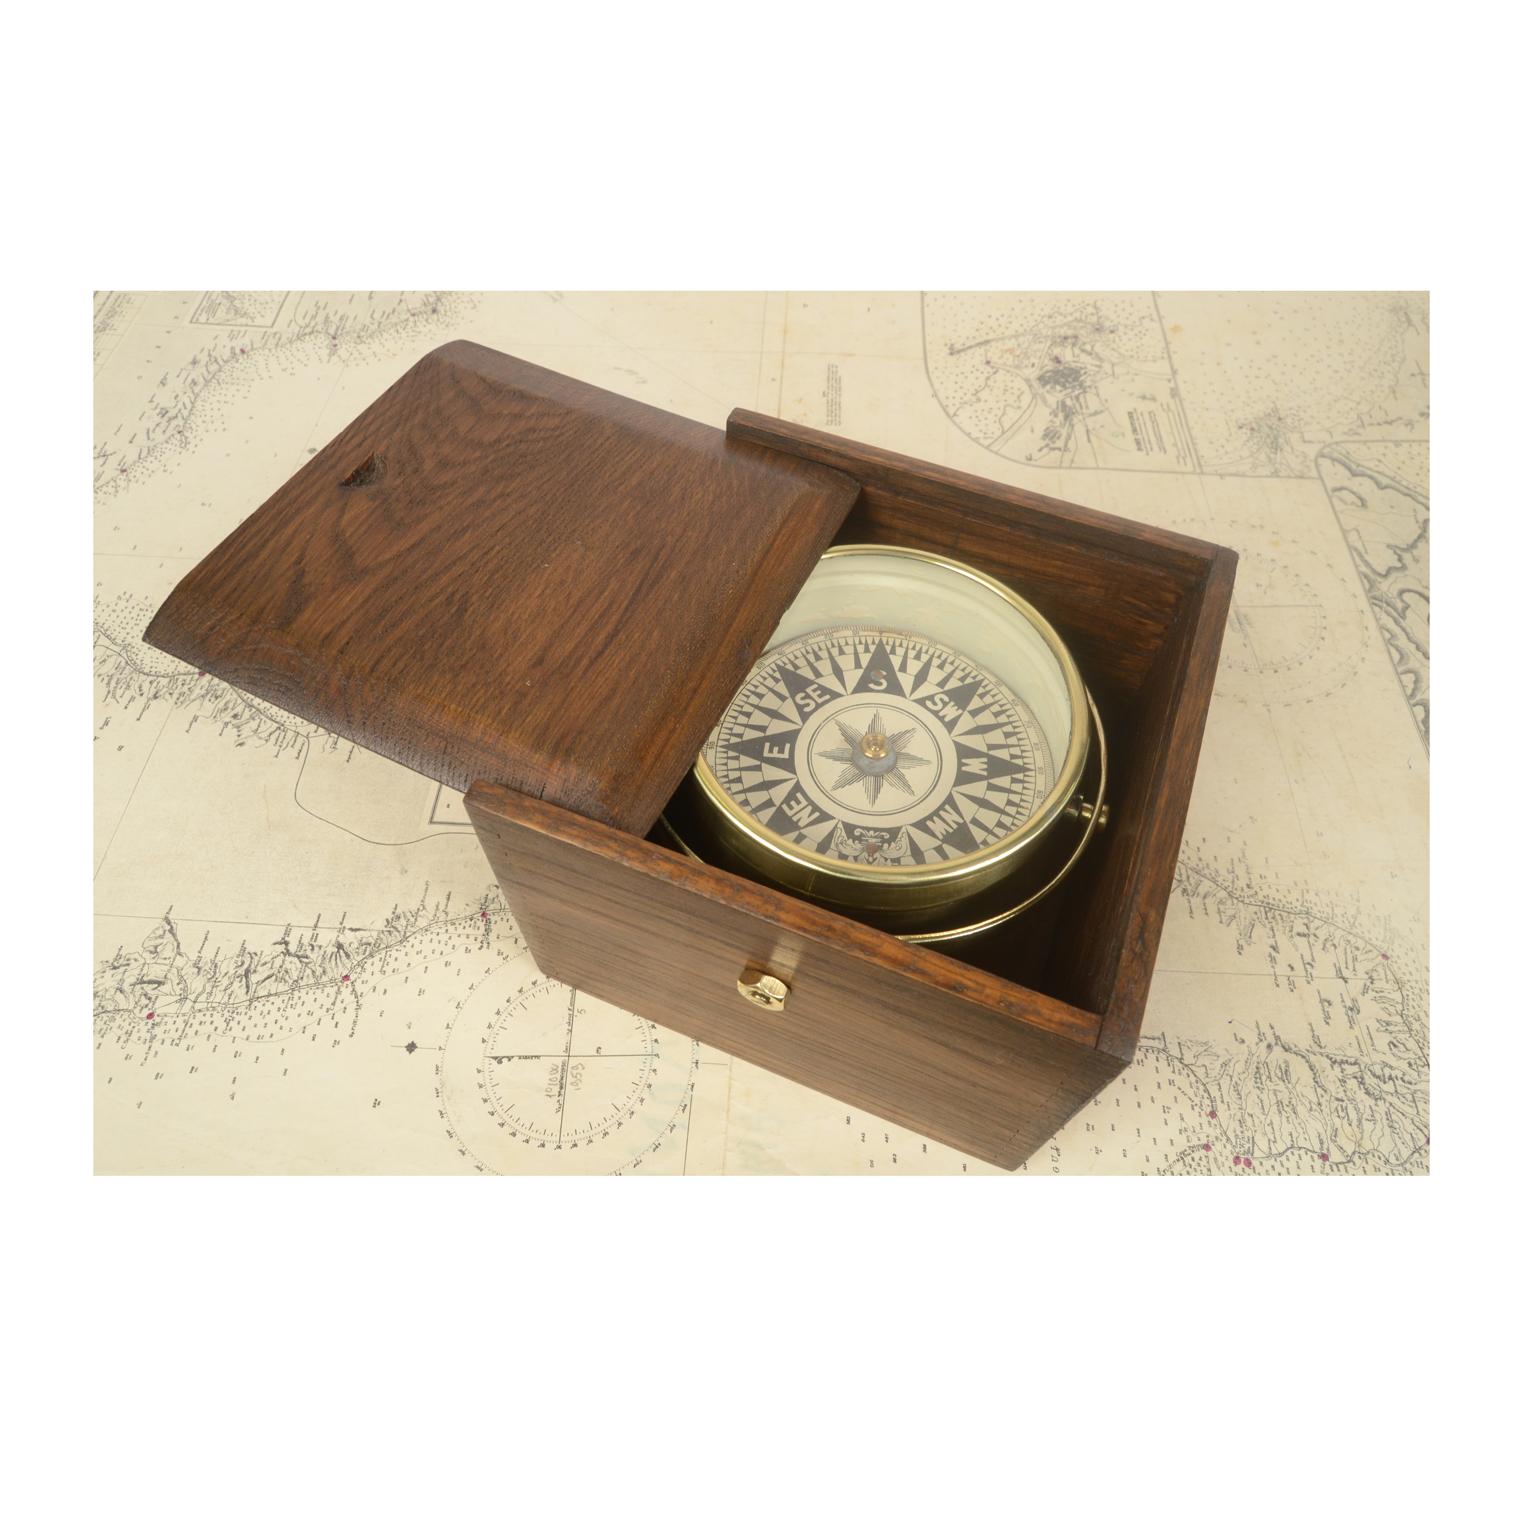 1860 English Antique Brass Nautical Magnetic Dry Compass in Original Wooden Box  1